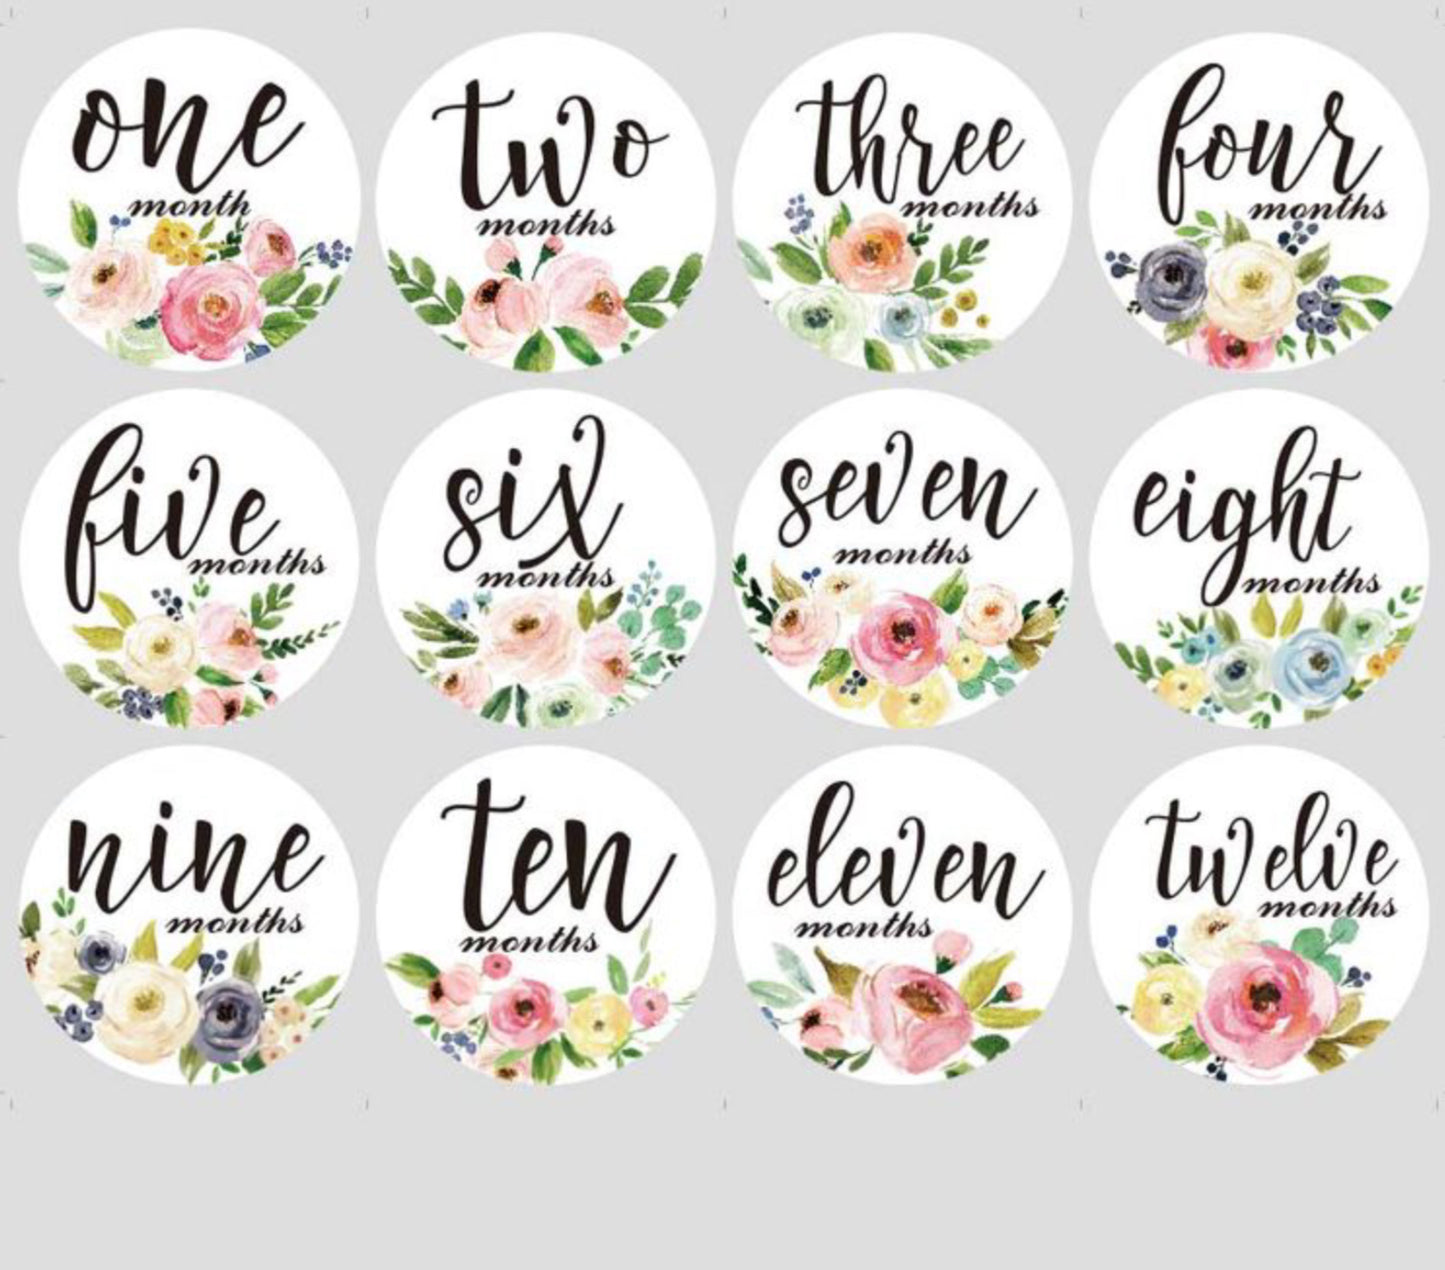 Floral Baby Monthly Tracker | Set of 12 Personalized Baby Girl Monthly Stickers, Baby Month Stickers, Baby Floral Nursery , Baby Gift, Baby Photo Prop | Makes a lovely baby shower gift!